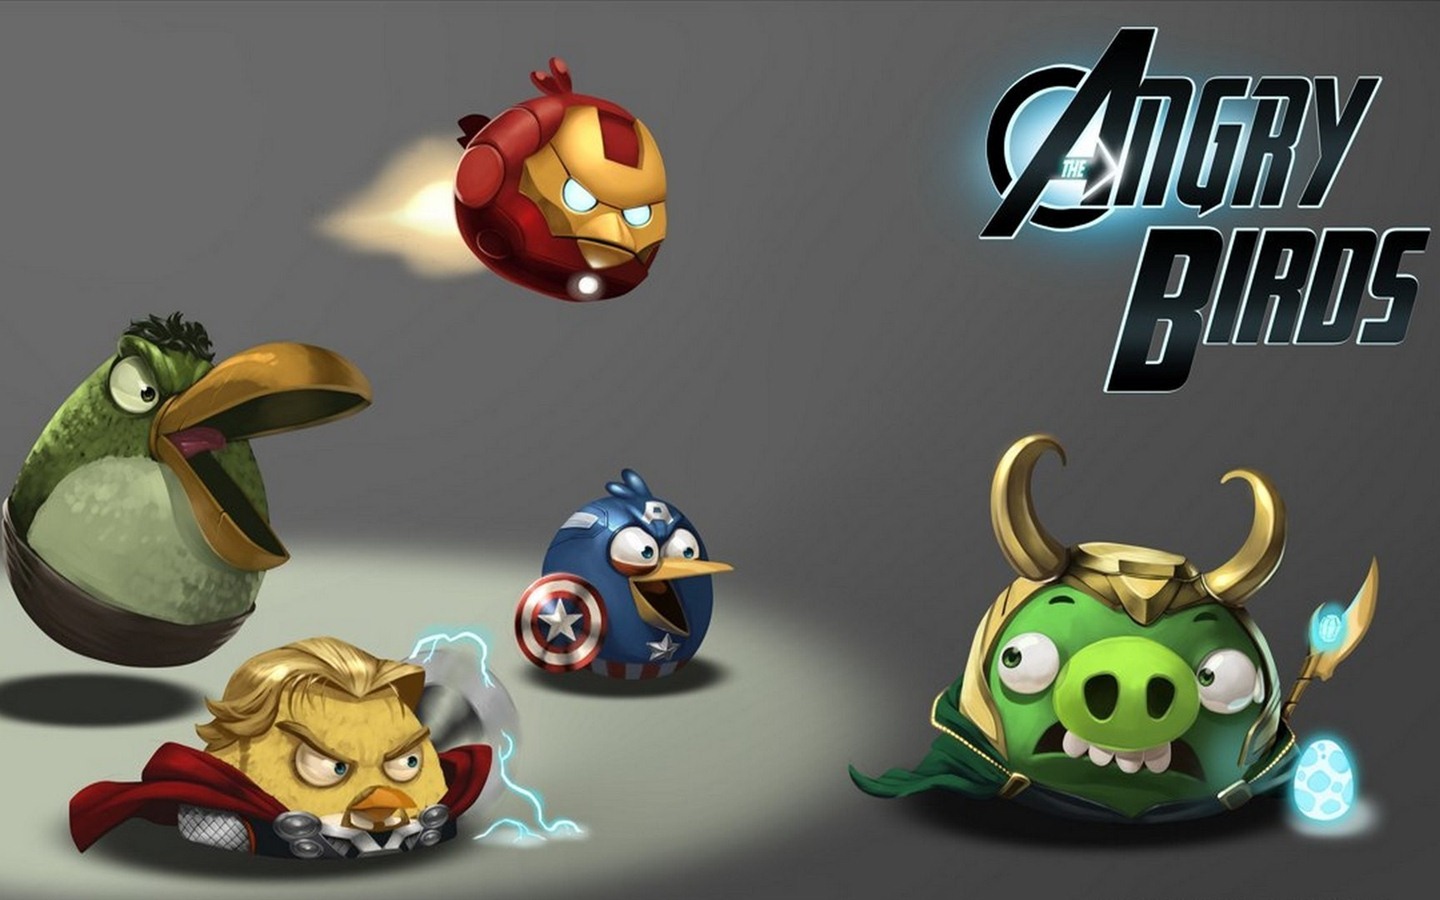 Angry Birds Game Wallpapers #8 - 1440x900